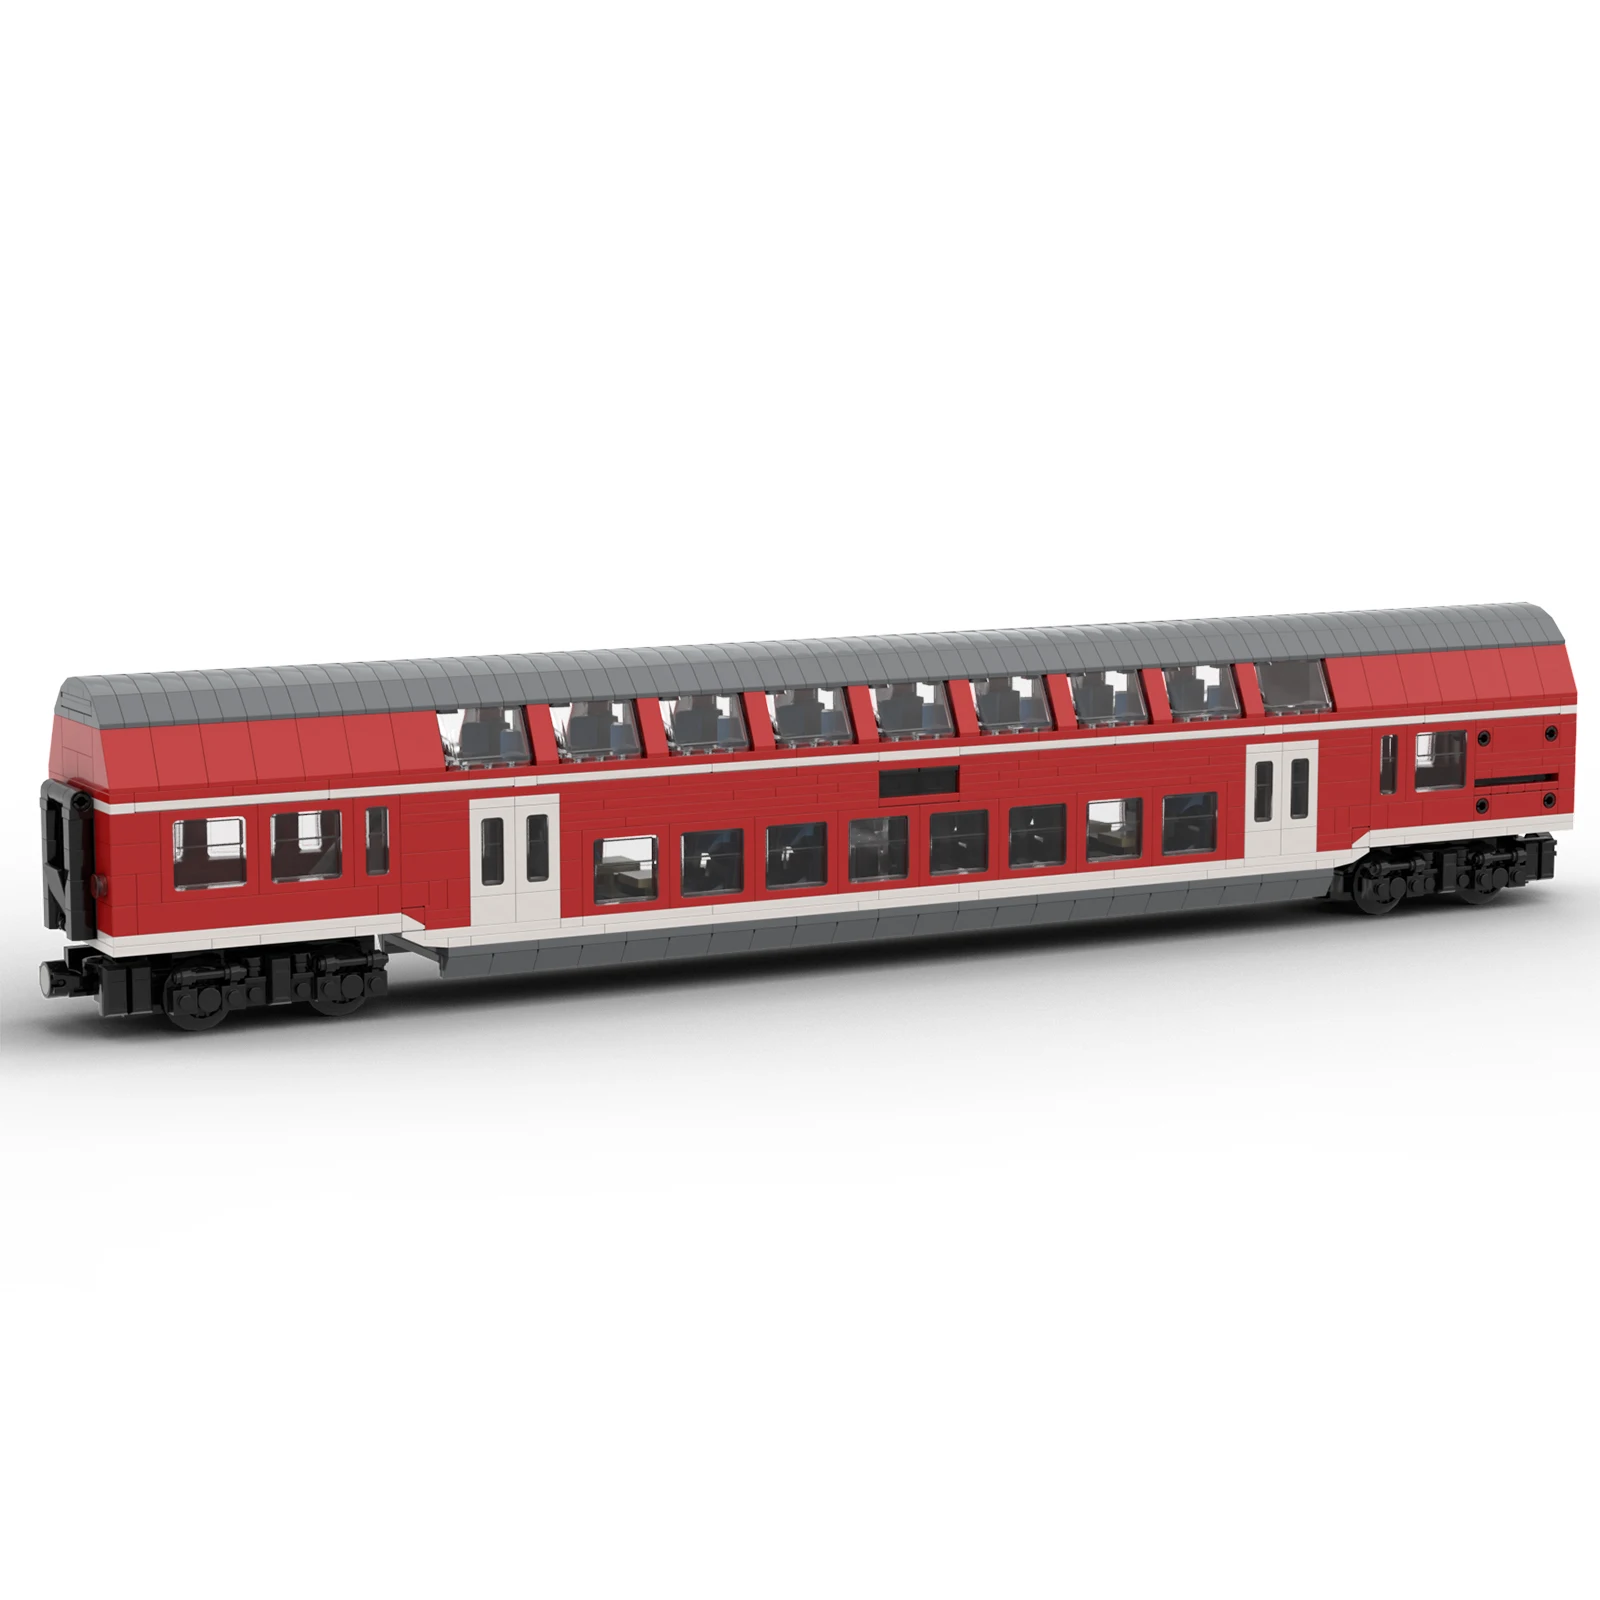 Ss mittelwagen dbpza 782 double deck bus small particles blocks by germanrailwaybuilder thumb200